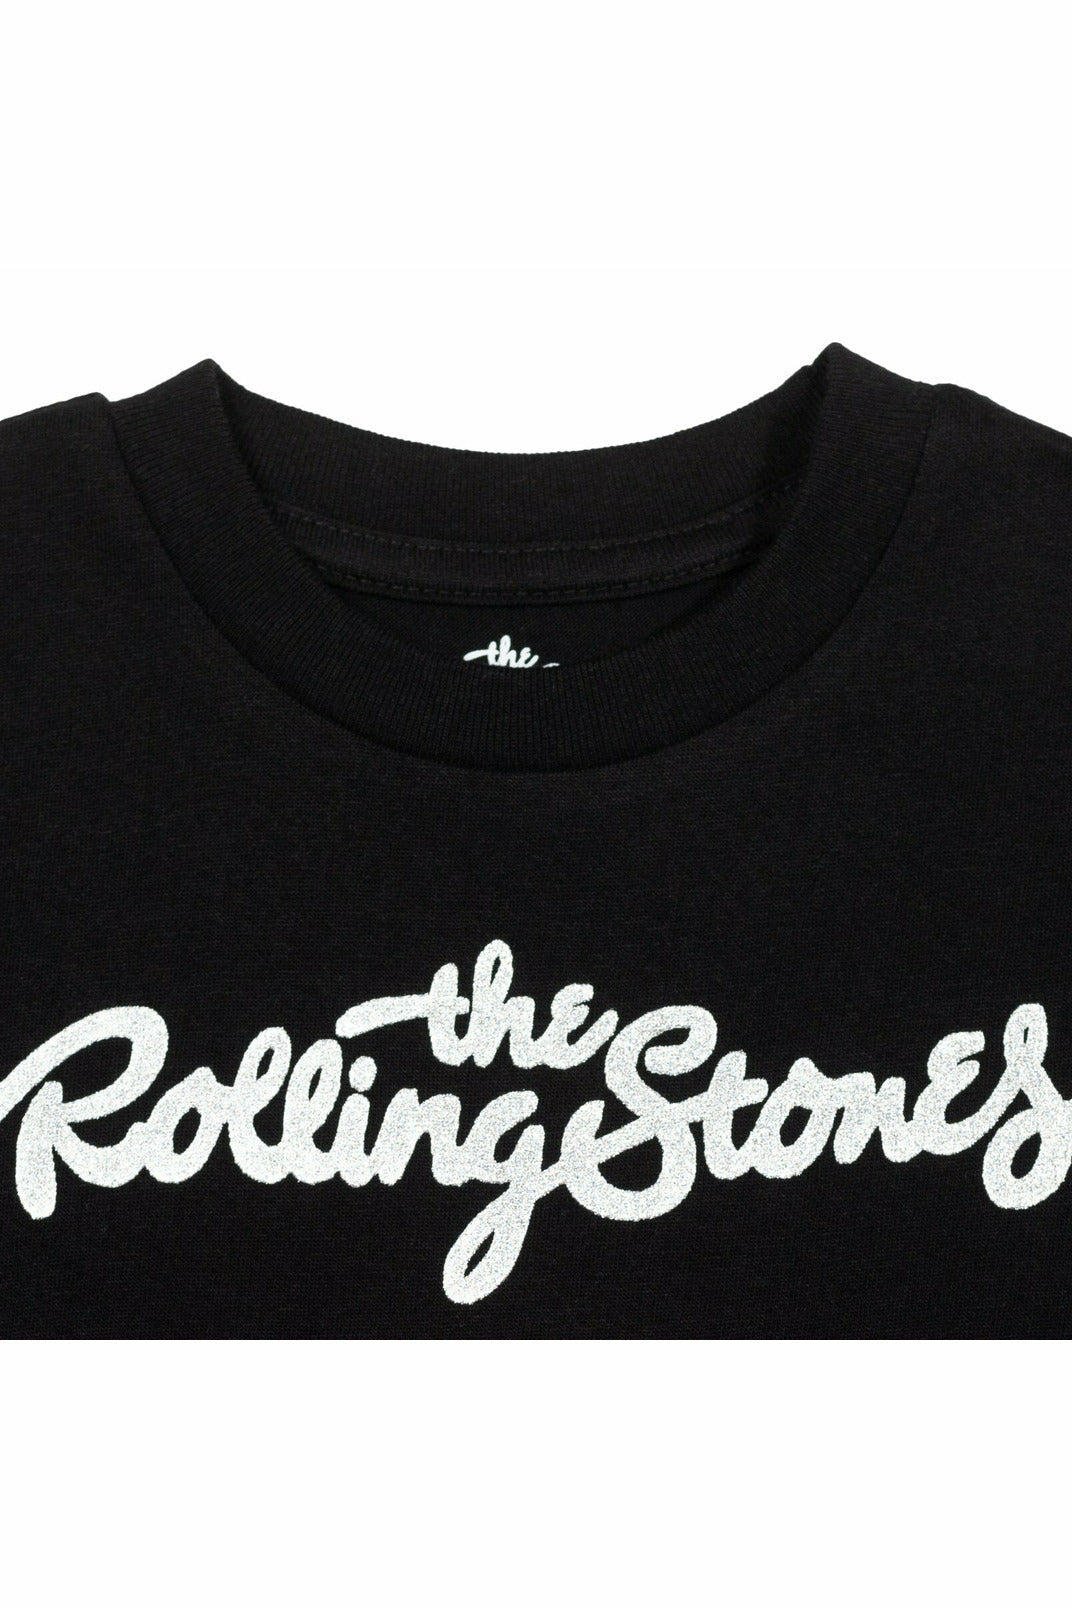 Rolling Stones Graphic T-Shirt